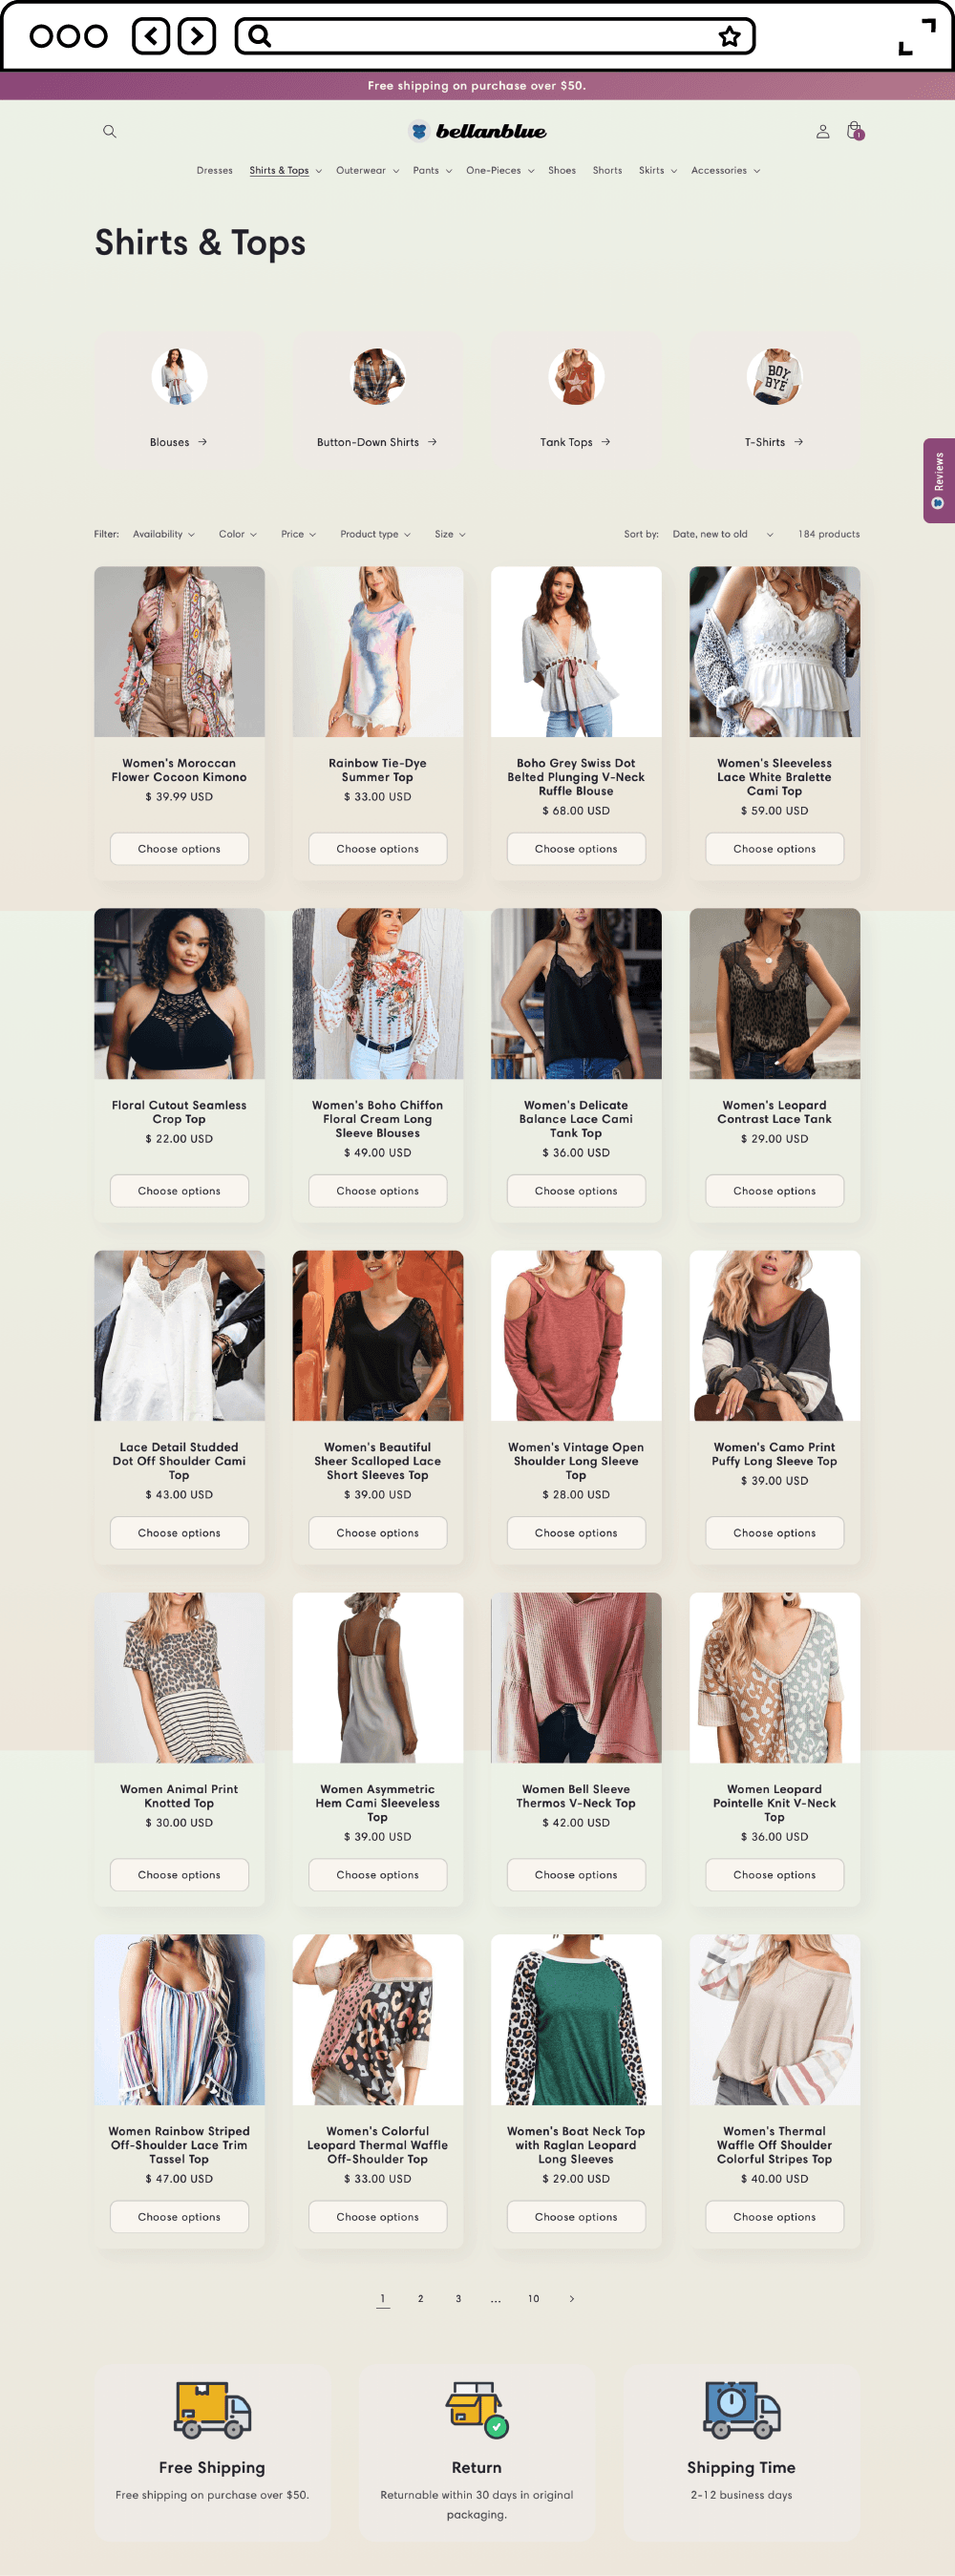 Apercher Website Design: Bellanblue ecommerce fashion website design shirts and tops collection page in desktop view